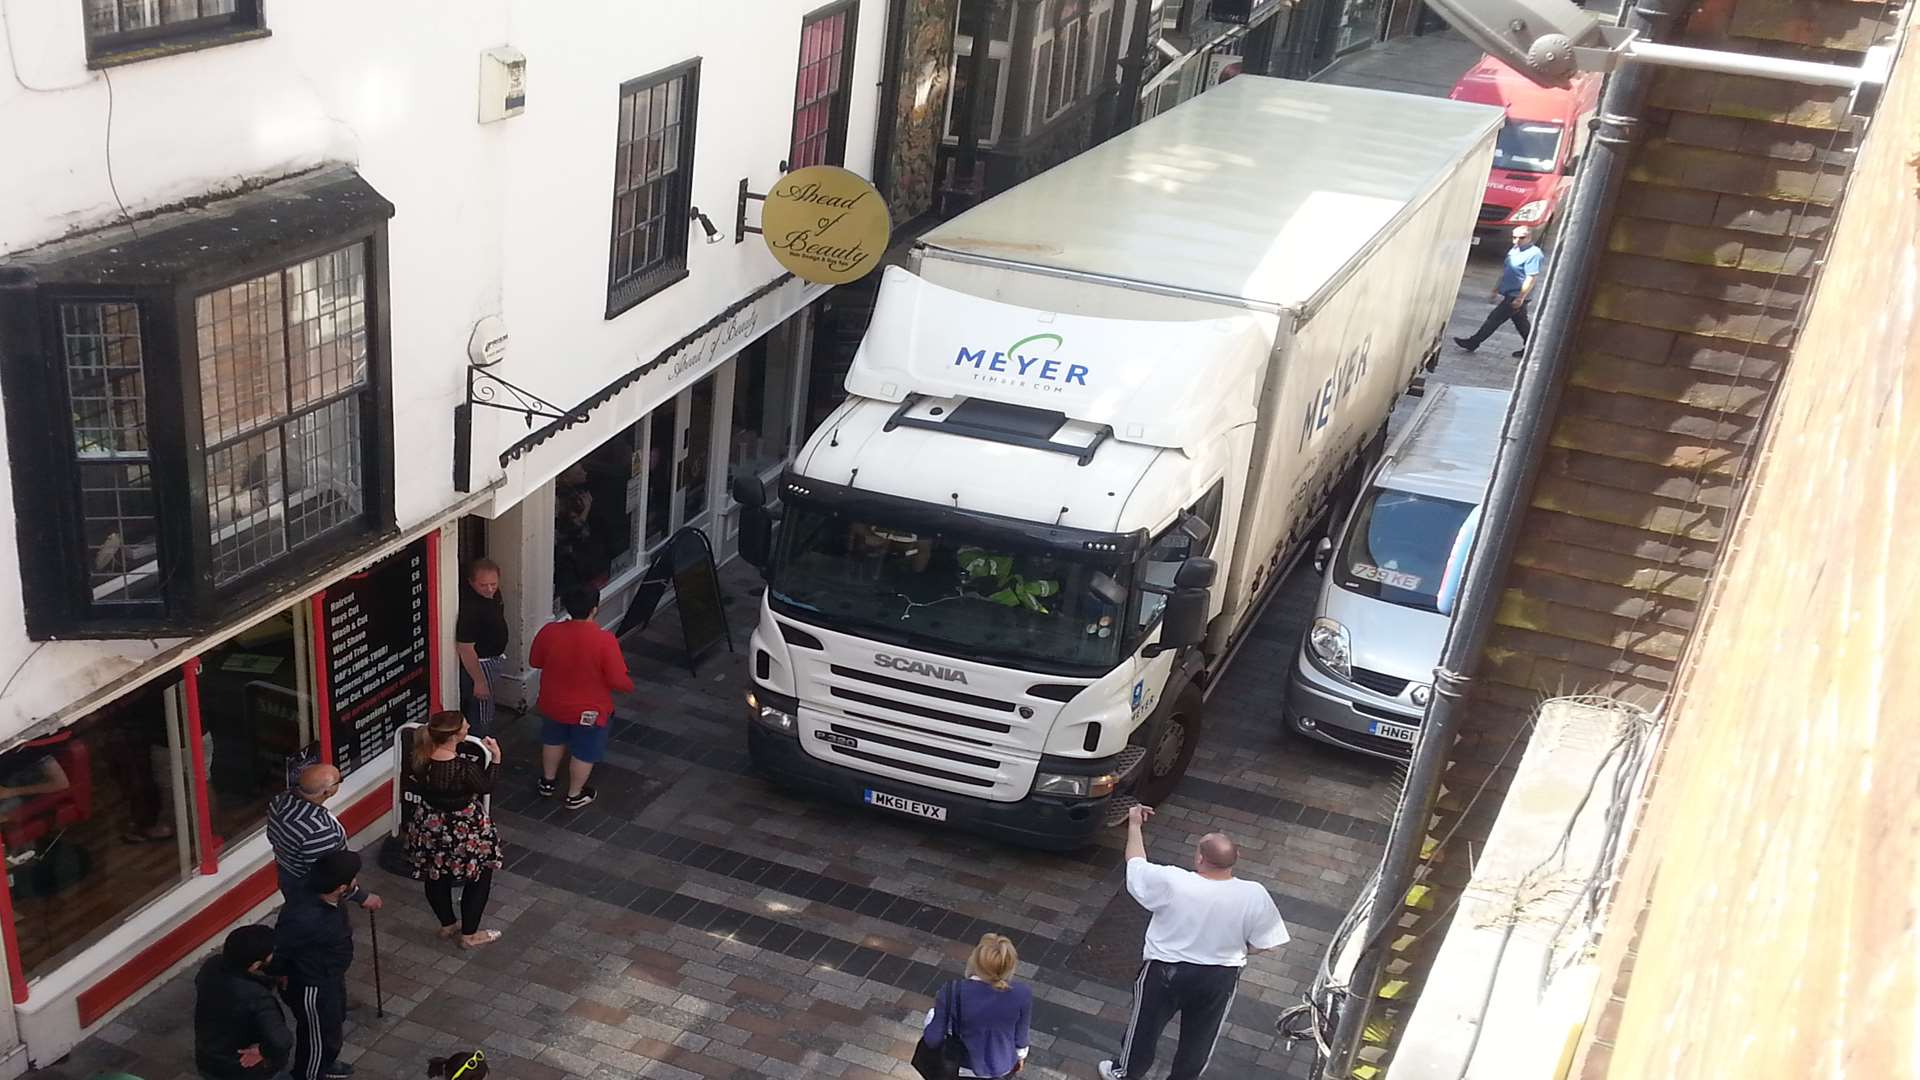 The lorry found Bank Street a tight squeeze